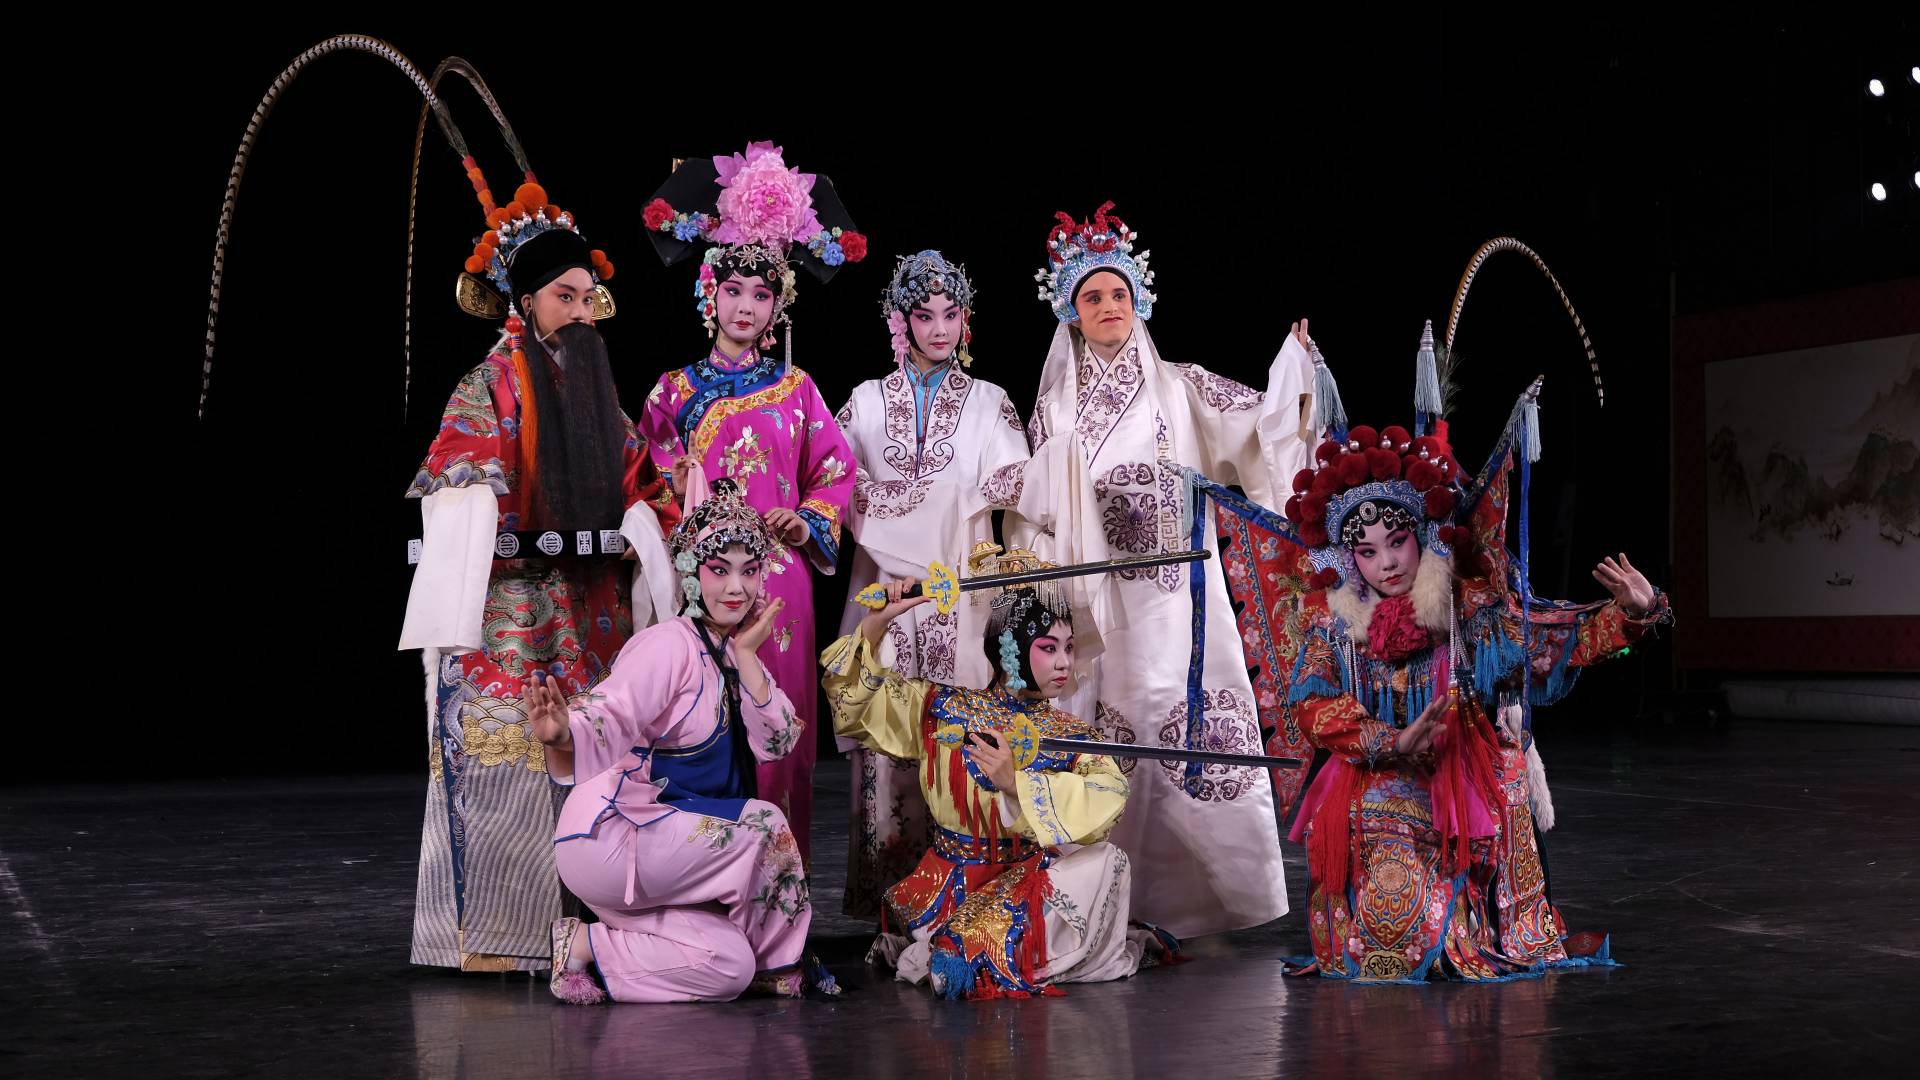 Students in Peking Opera costumes on stage